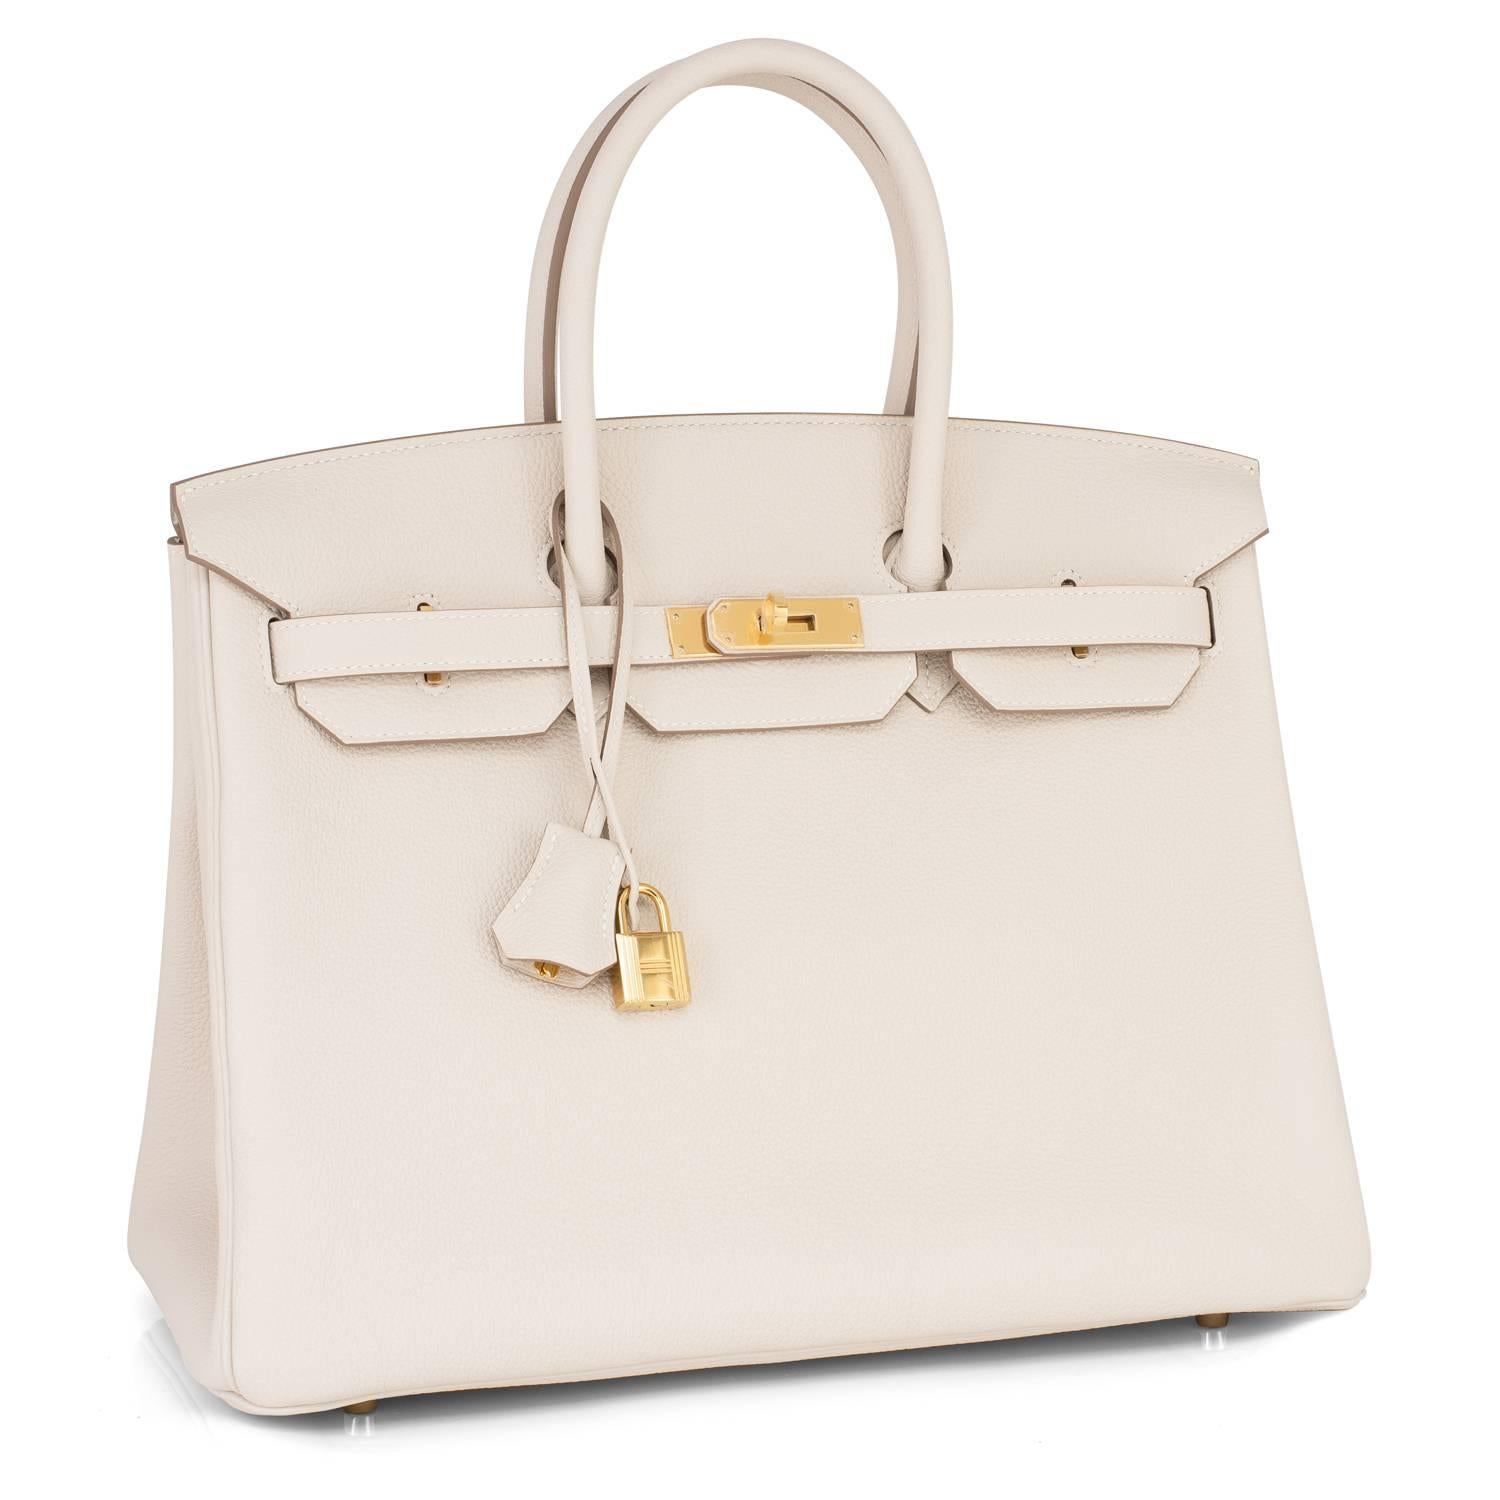 Hermes Craie Chalk Off White 35cm Togo Birkin Gold Hardware
Brand New in Box.  Store fresh. Pristine Condition (plastic on hardware.) 
Perfect gift! Comes in full set with lock, keys, clochette, sleeper, raincoat, and Hermes box. 
As seen on many